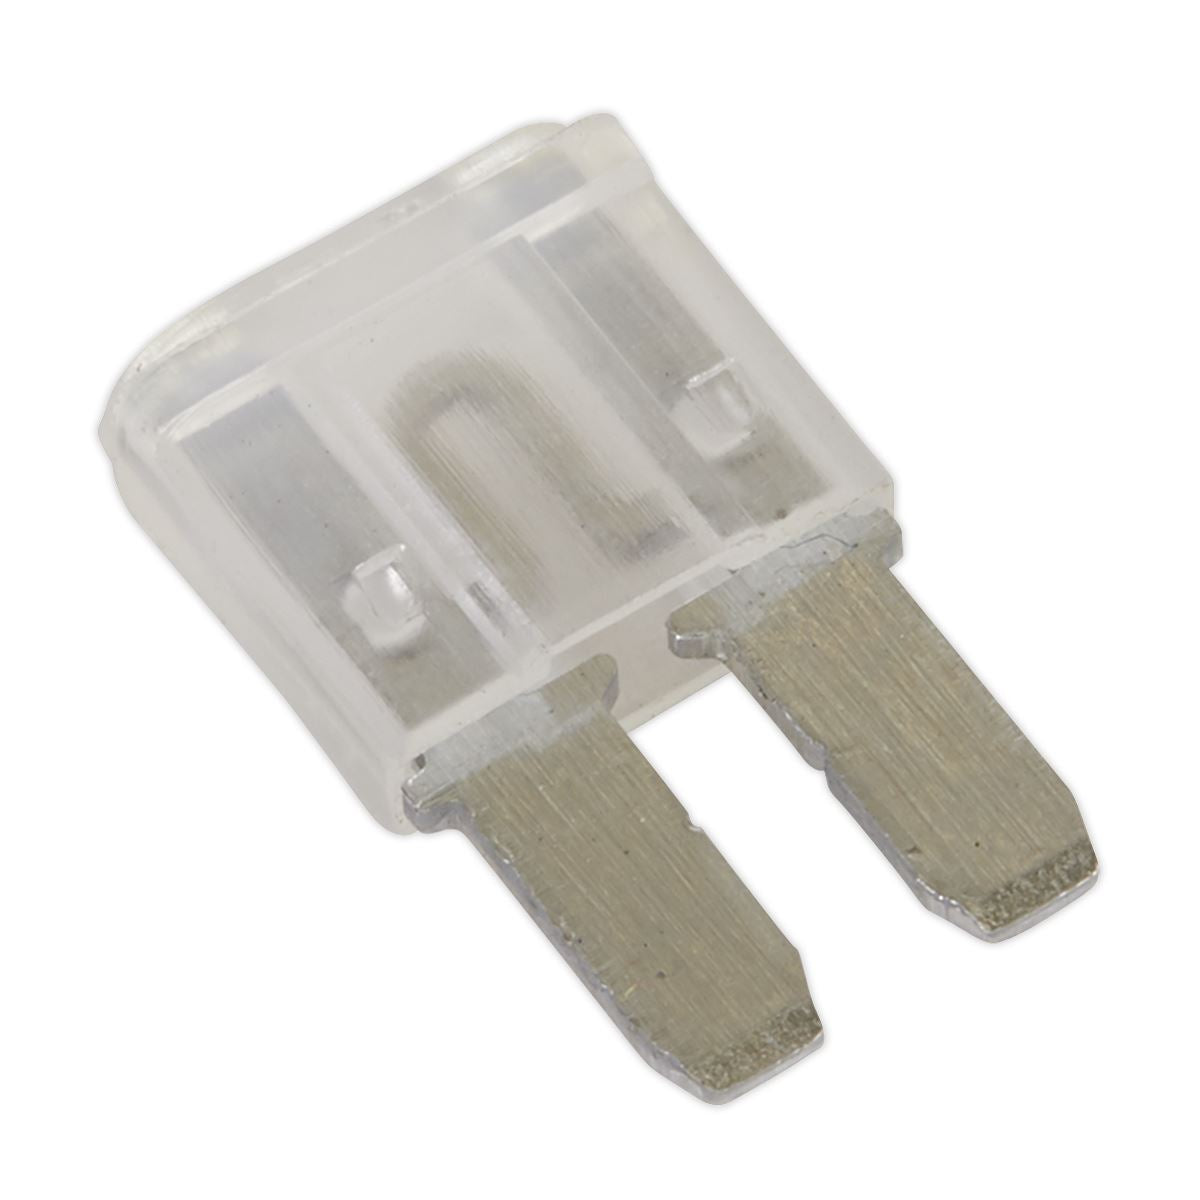 Sealey Automotive MICRO II Blade Fuse 25A - Pack of 50